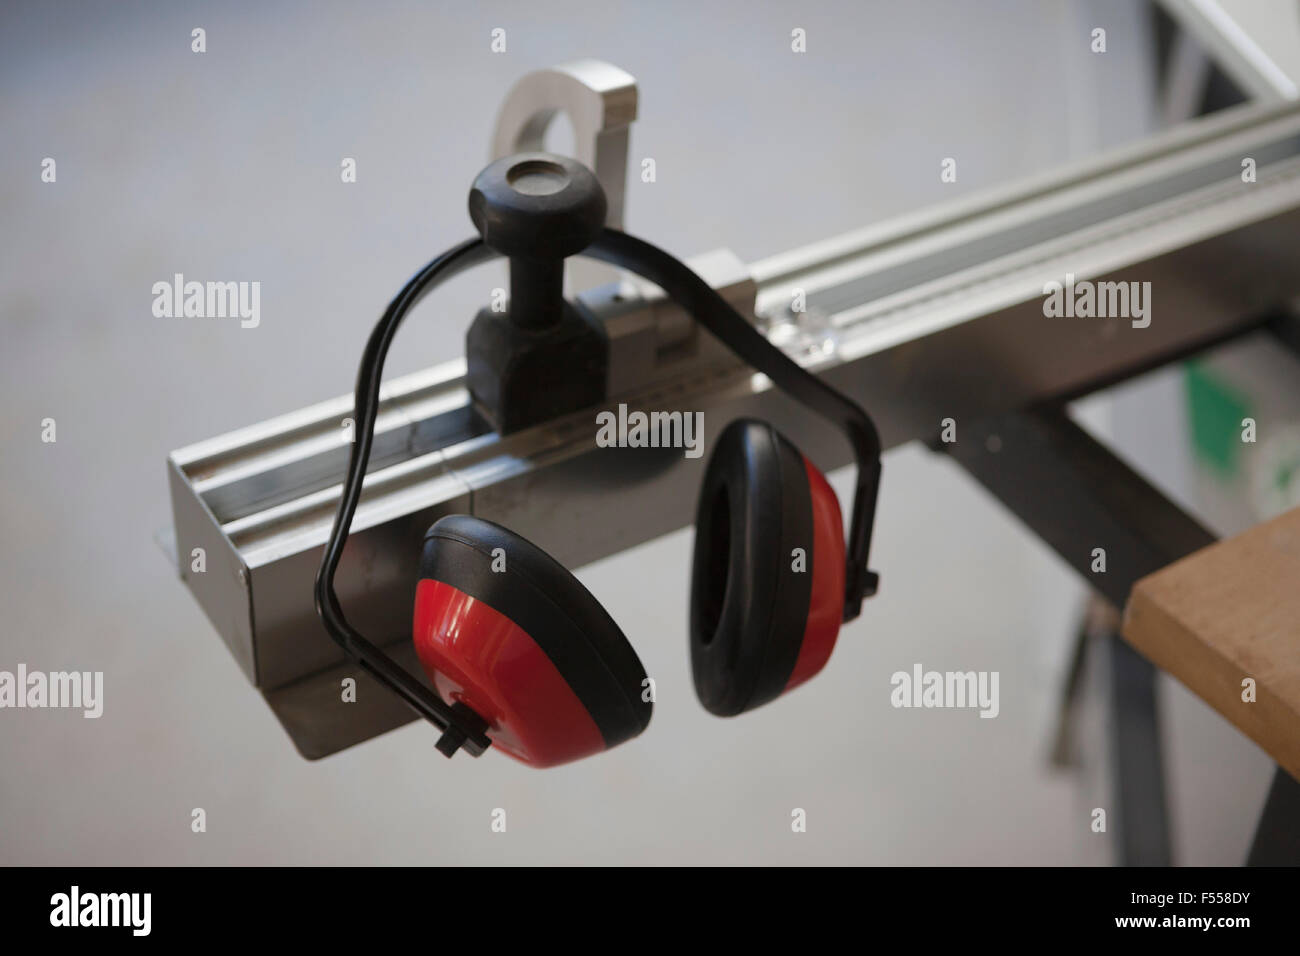 Ear protector hanging from sliding table saw in workshop Stock Photo